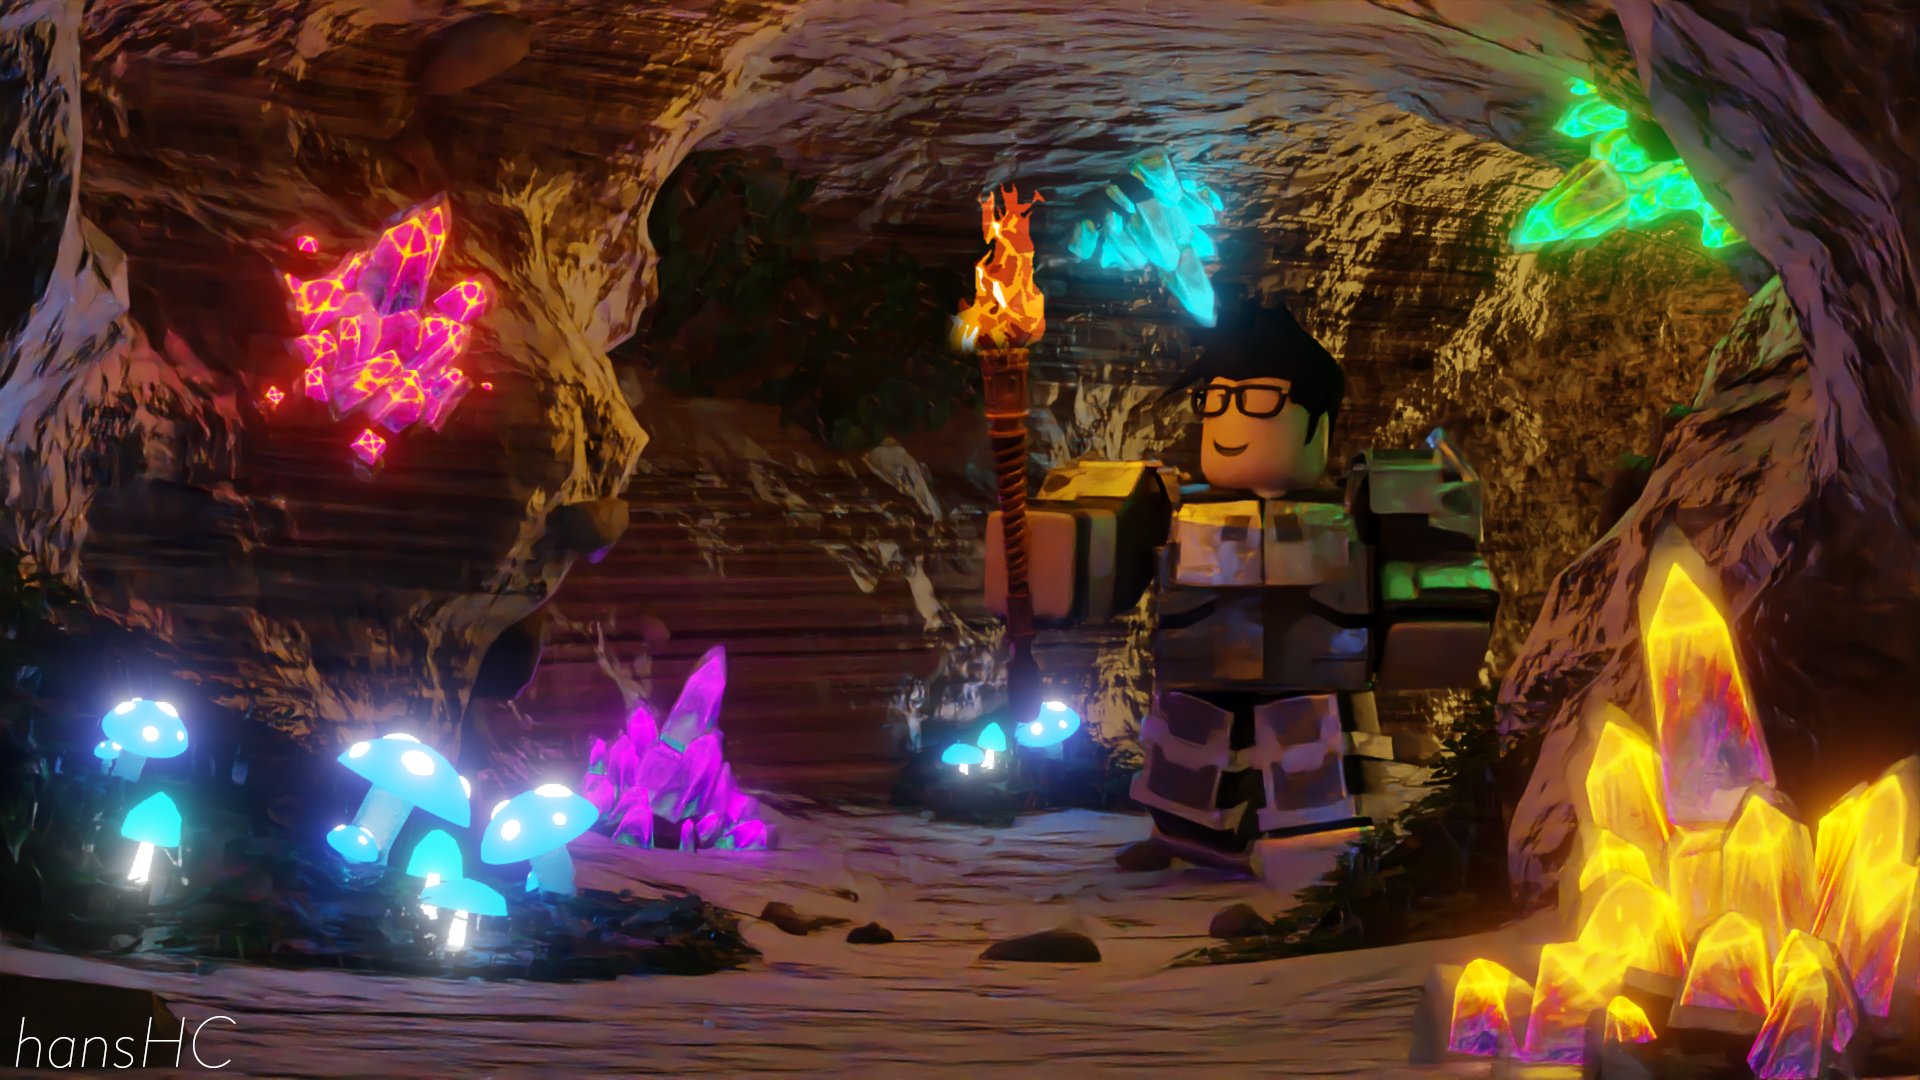 Hans On Twitter Fantasy Crystal Cave With Heyitshoppoip Tried A Different Type Of Render With More Different Colored Lighting And A Cool Art Style Likes And Rt S Appreciated Roblox Robloxart Robloxgfx - roblox crystal cave